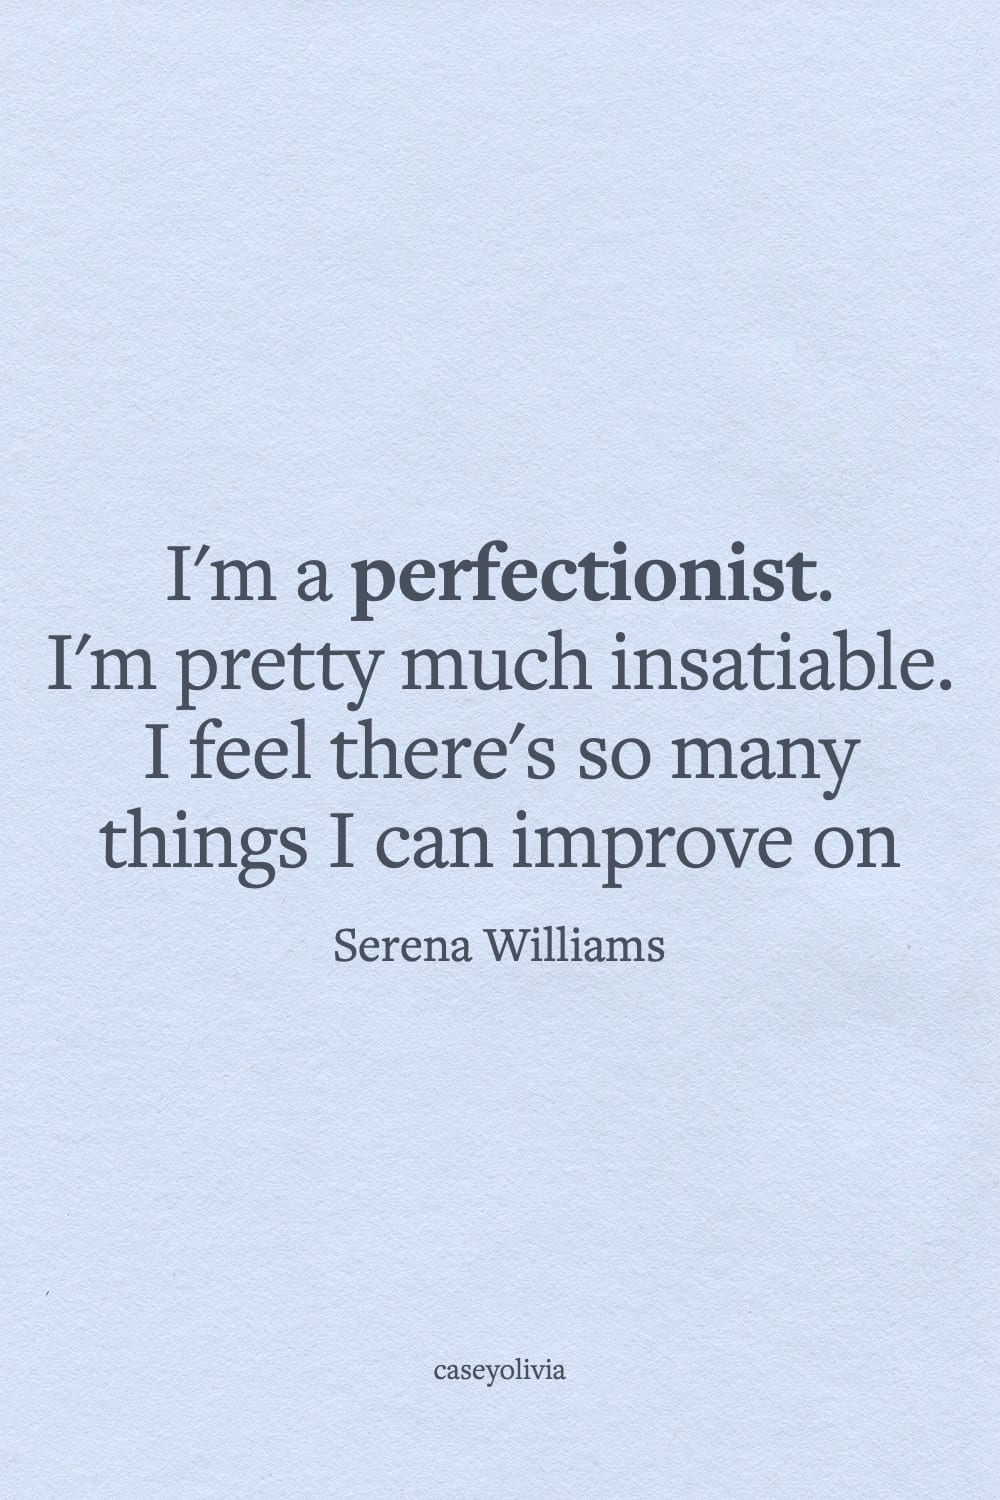 perfectionist serena williams saying to inspire a winning mindset